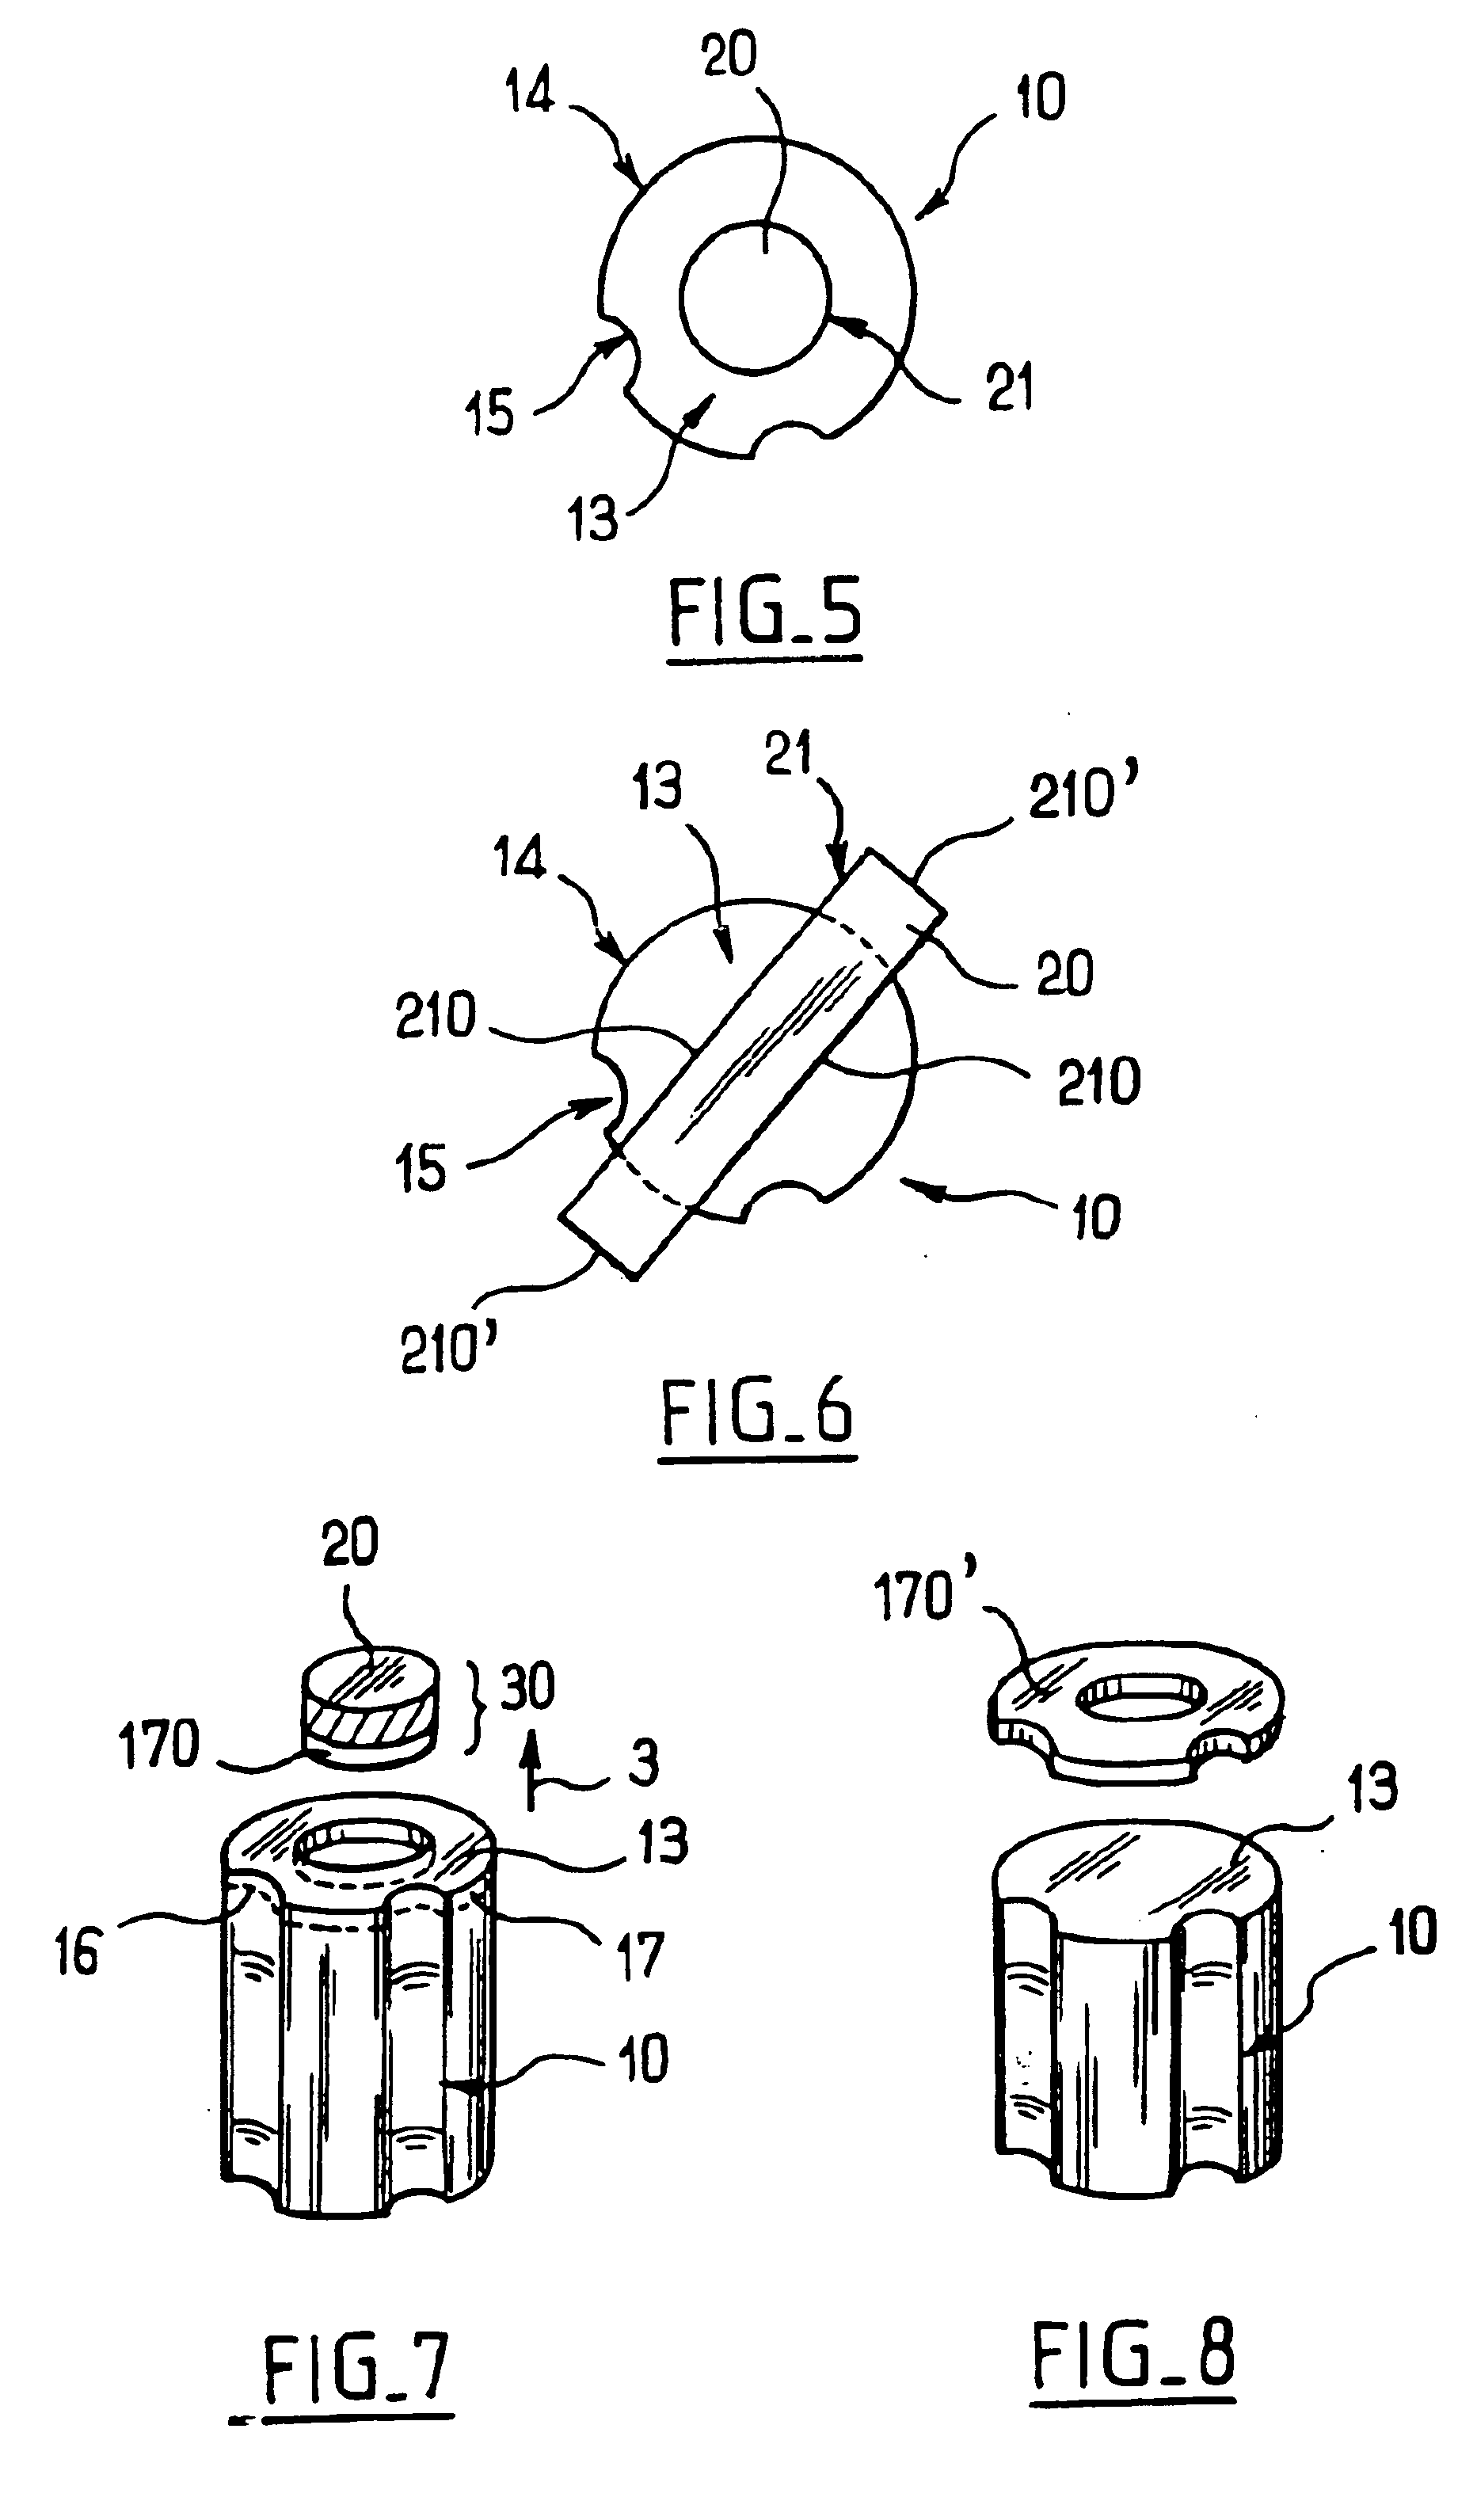 Method of fabricating substrates, in particular for optics, electronics or optoelectronics